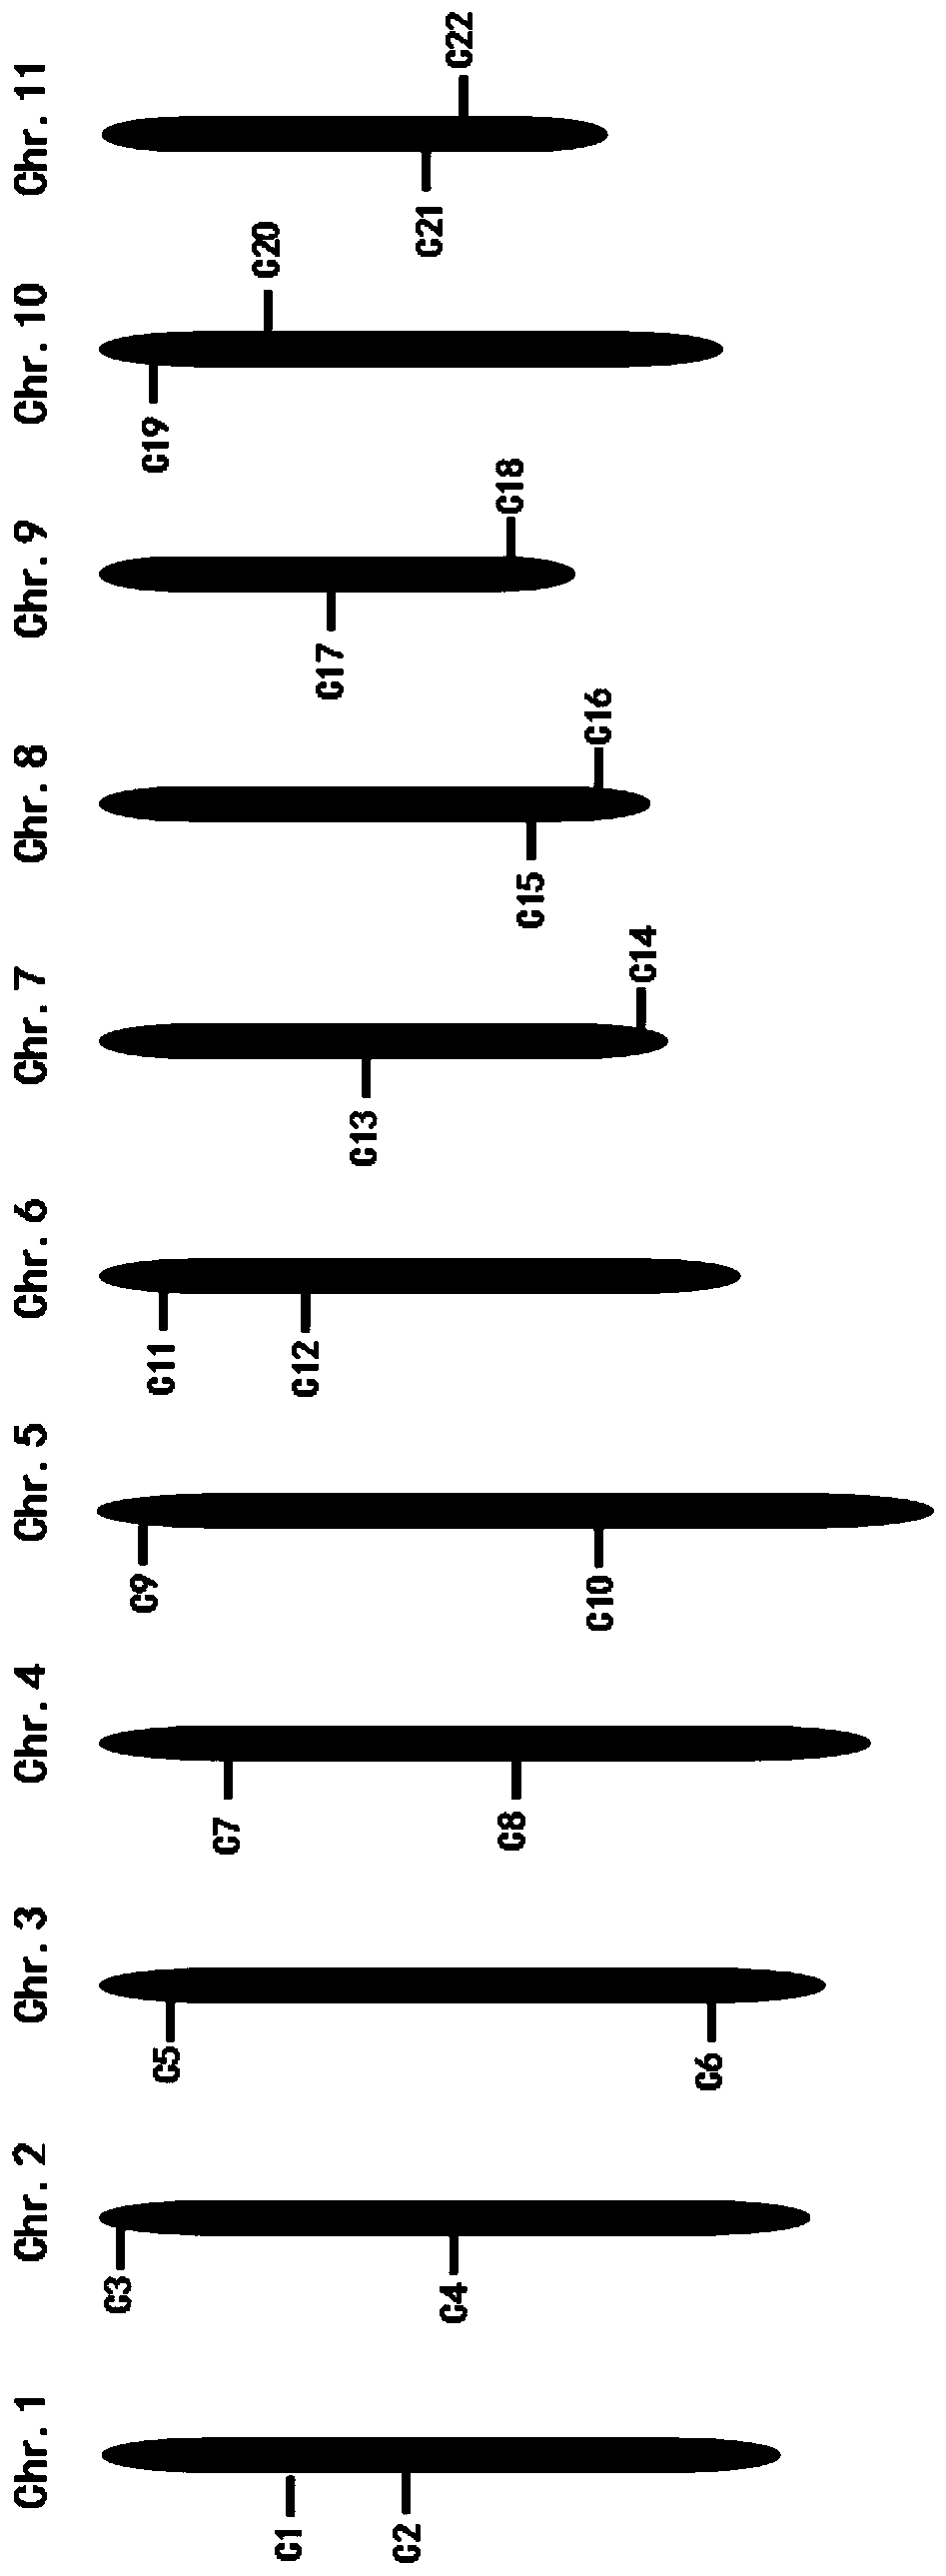 Bottle gourd core molecular marker set developed on basis of KASP technology and application thereof